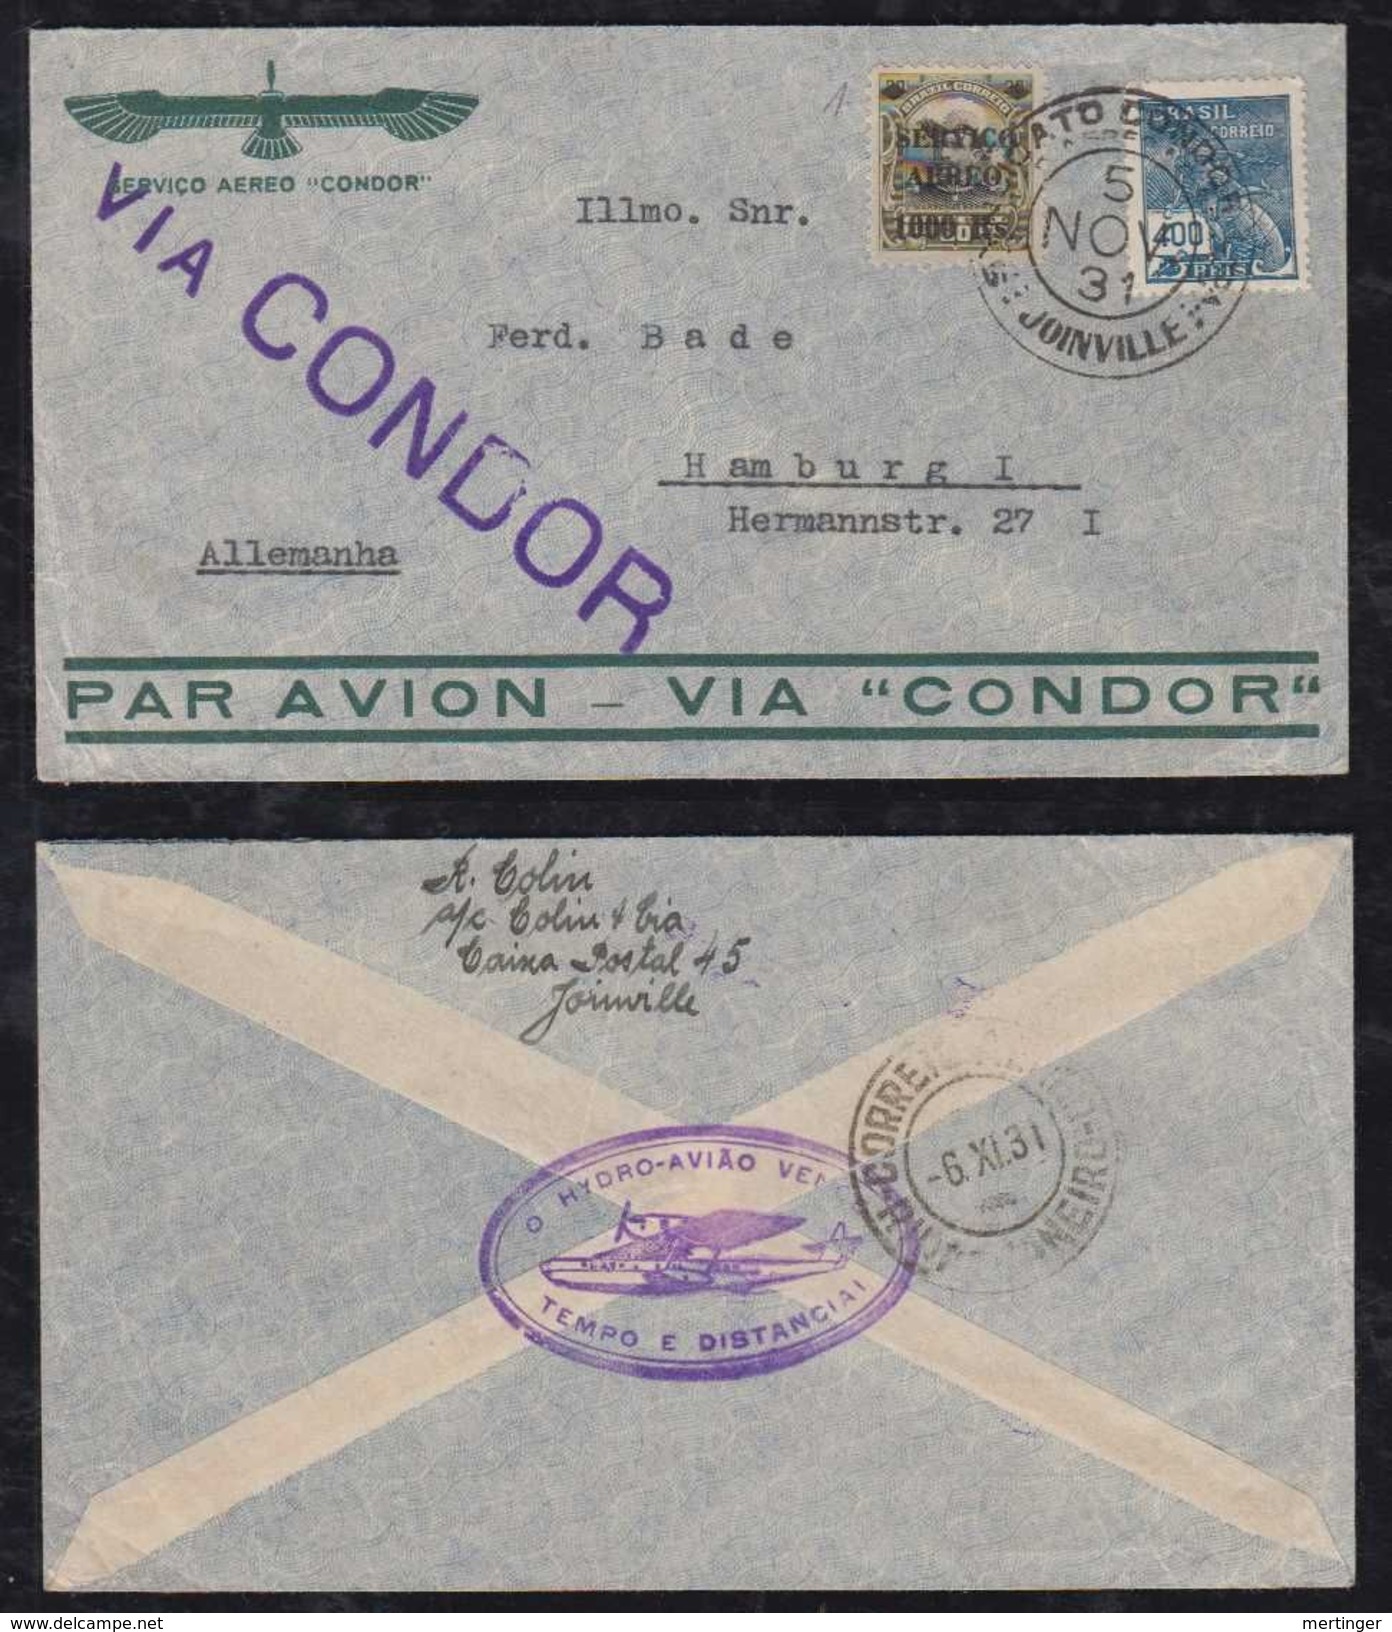 Brazil Brasil 1931 Airmail Cover CONDOR JOINVILLE Postmark To HAMBURG Germany Via RIO - Airmail (Private Companies)